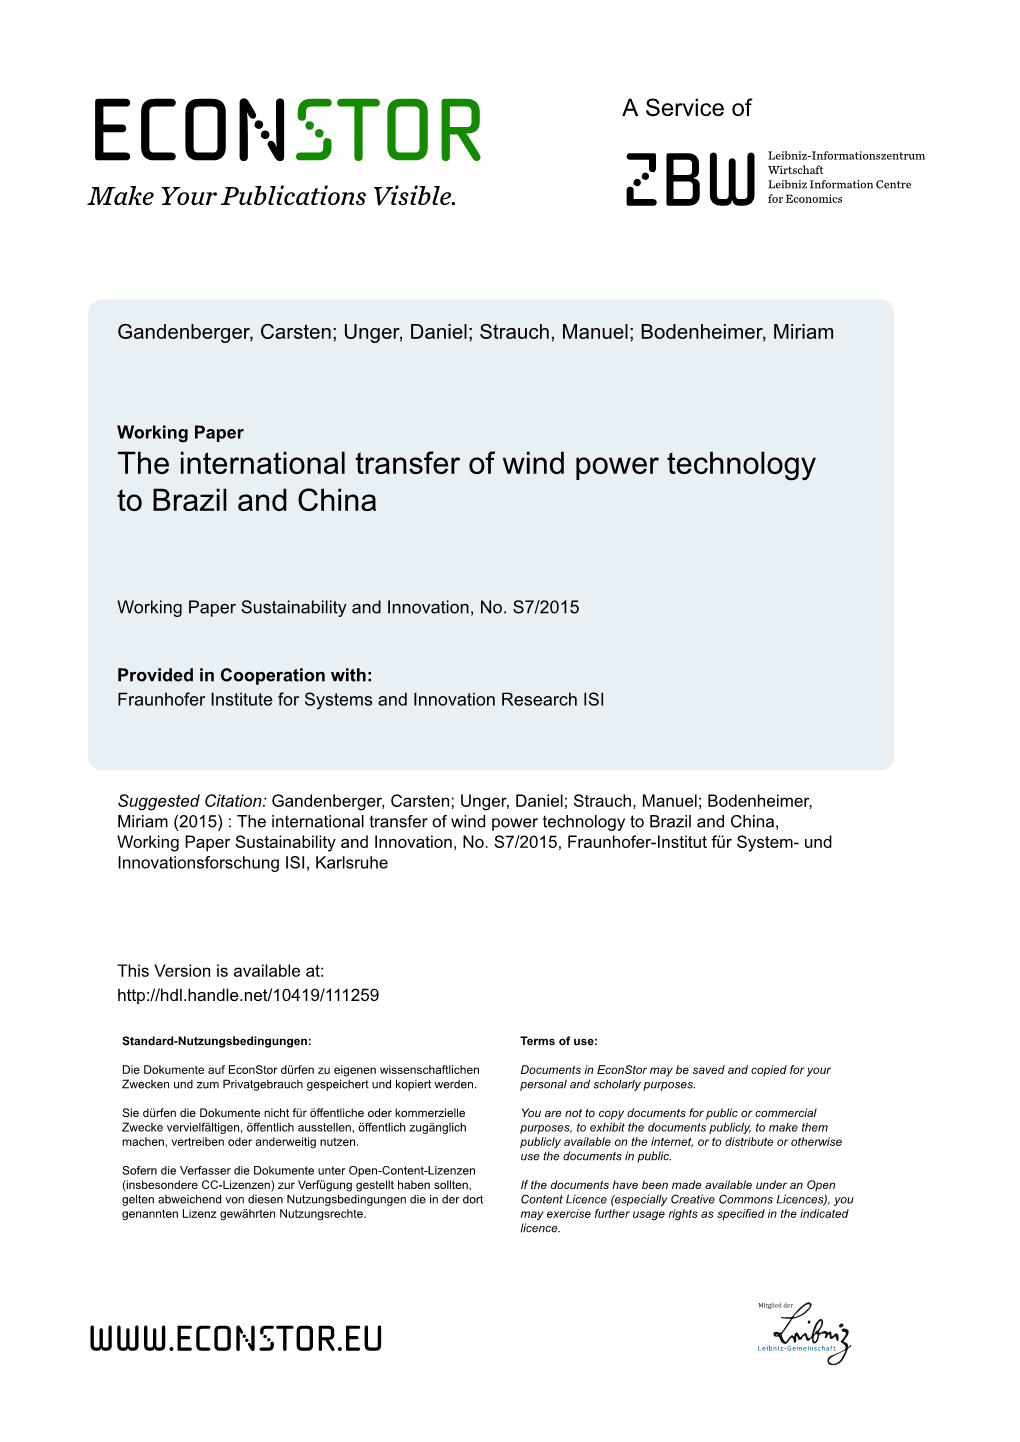 The International Transfer of Wind Power Technology to Brazil and China